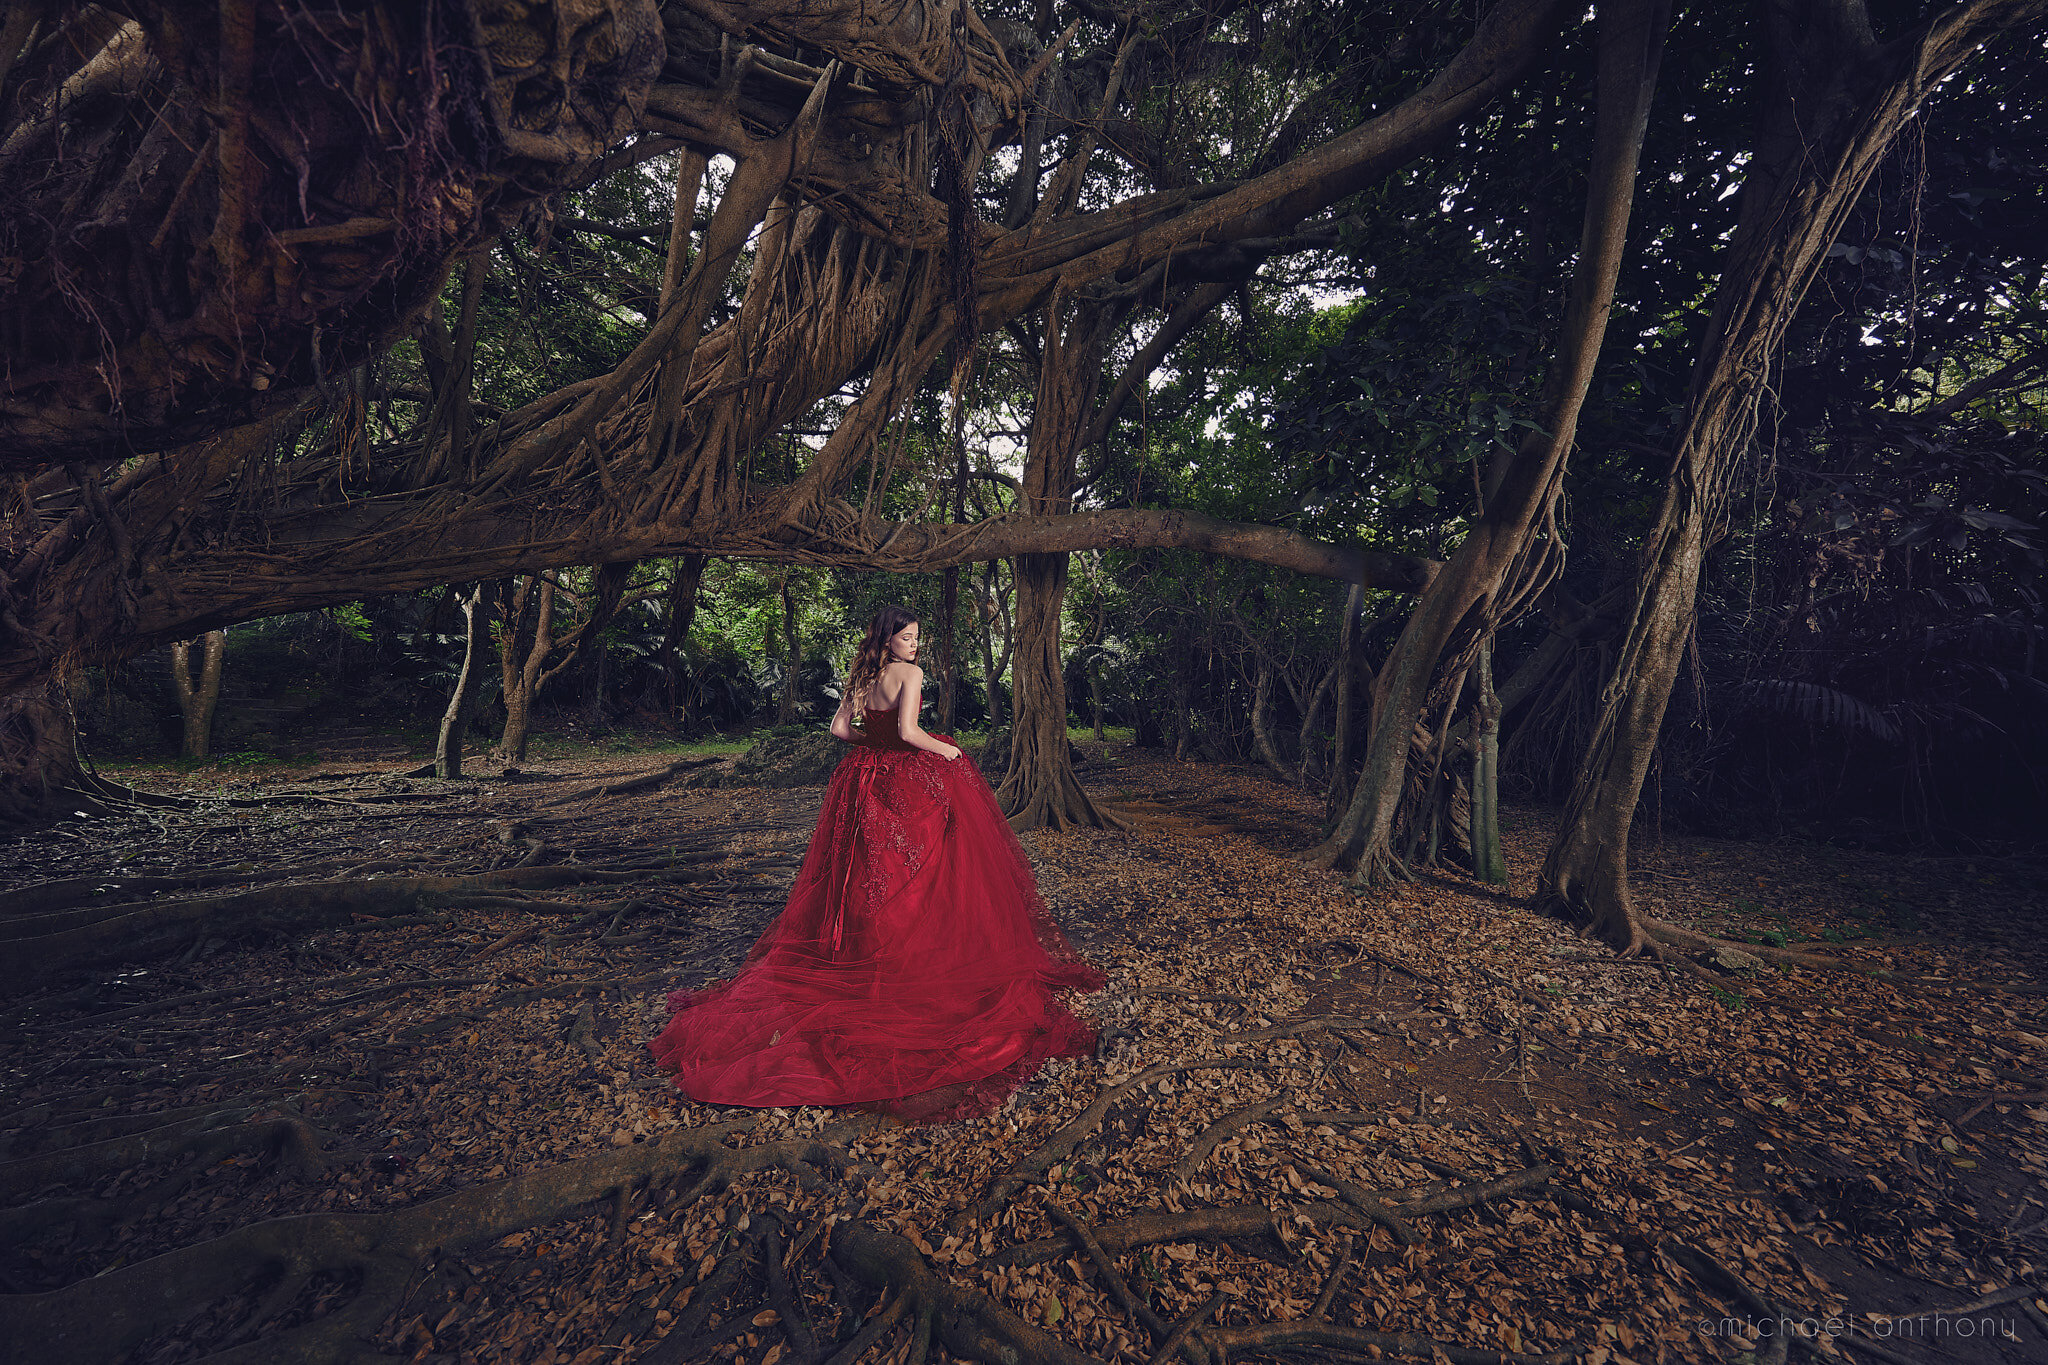 In the woods- Okinawa Photography